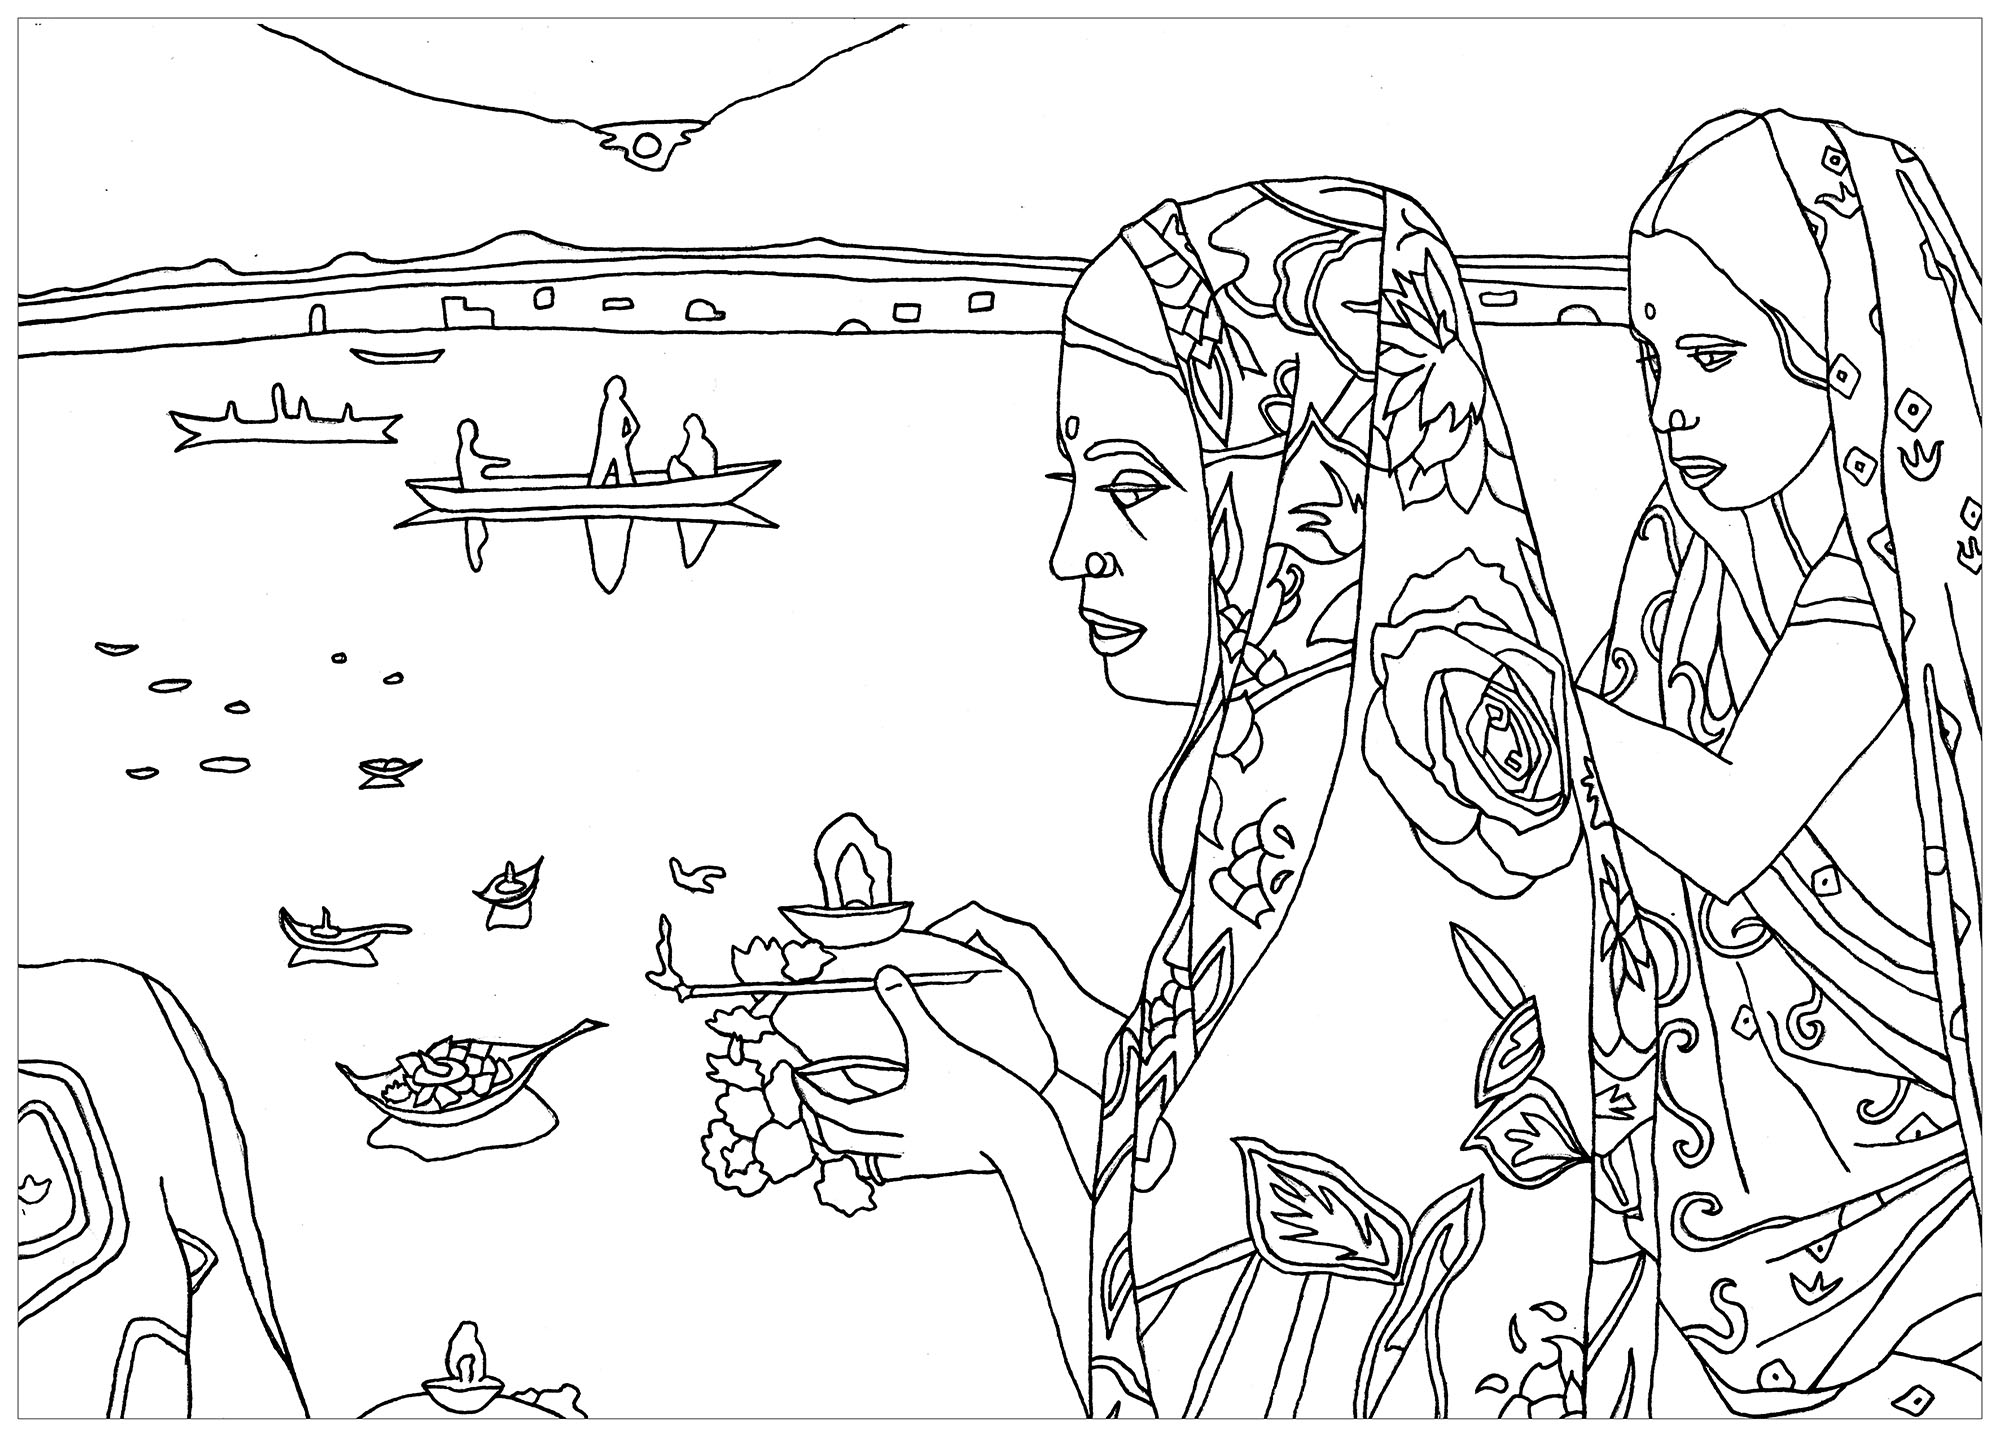 Coloring page inspired by the Puja : Hindu religious rite, Artist : Marion C